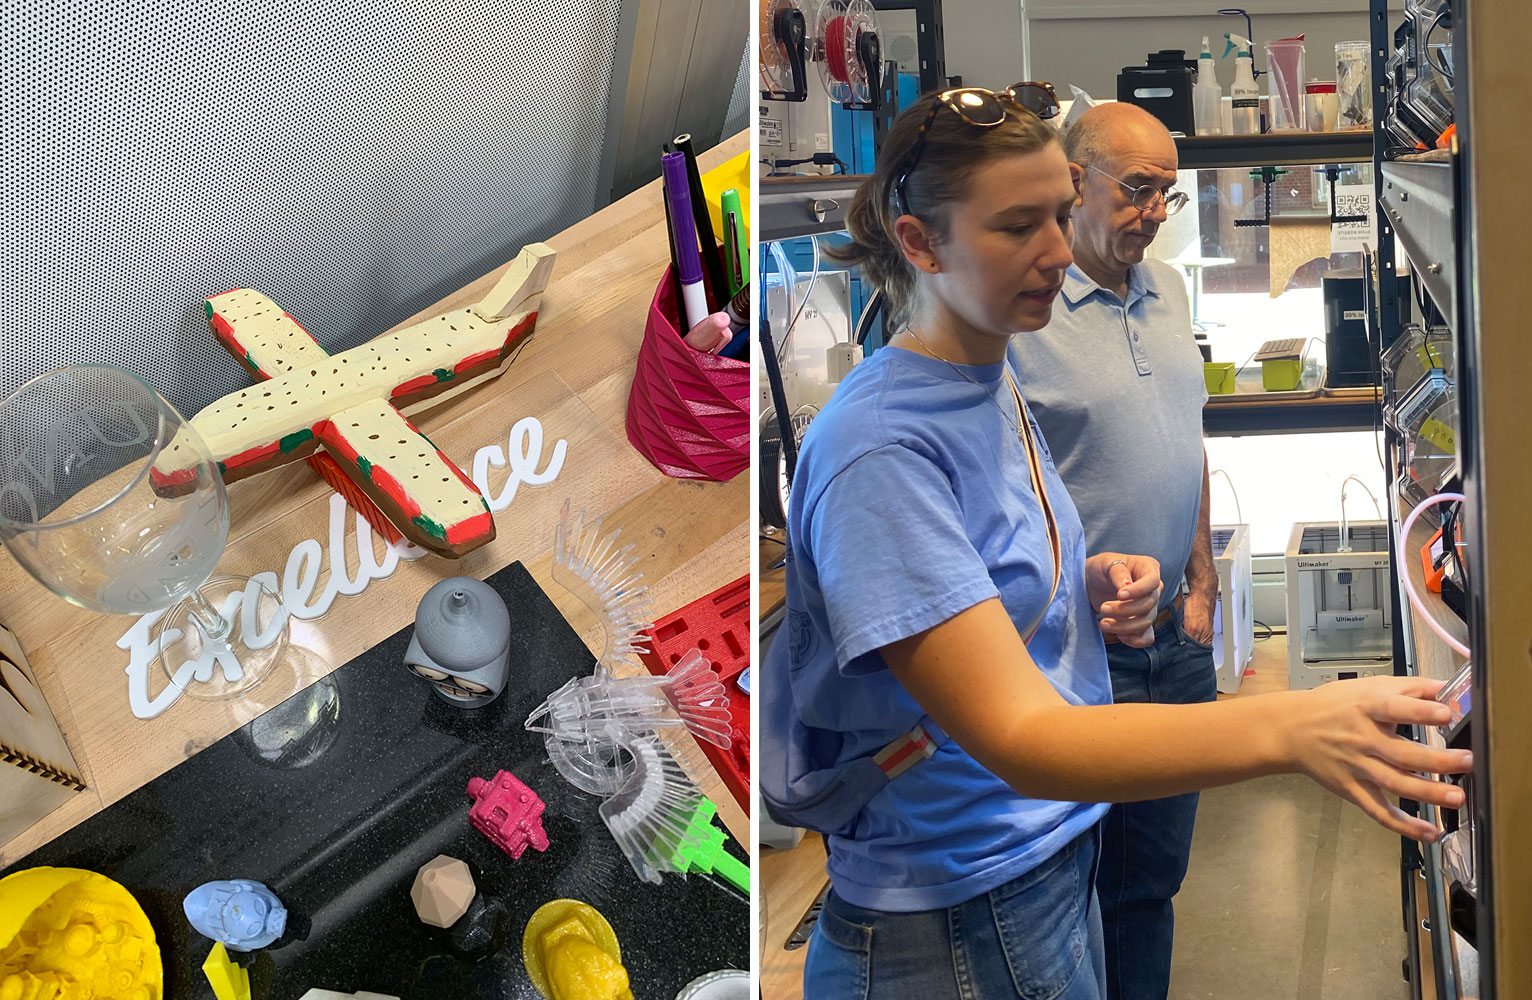 Diptych photo with a variety of 3D printed objects, arts and crafts on a table on the left side, and Maggie Ambrose and a staff member facing a shelf of 3D printers on the right side